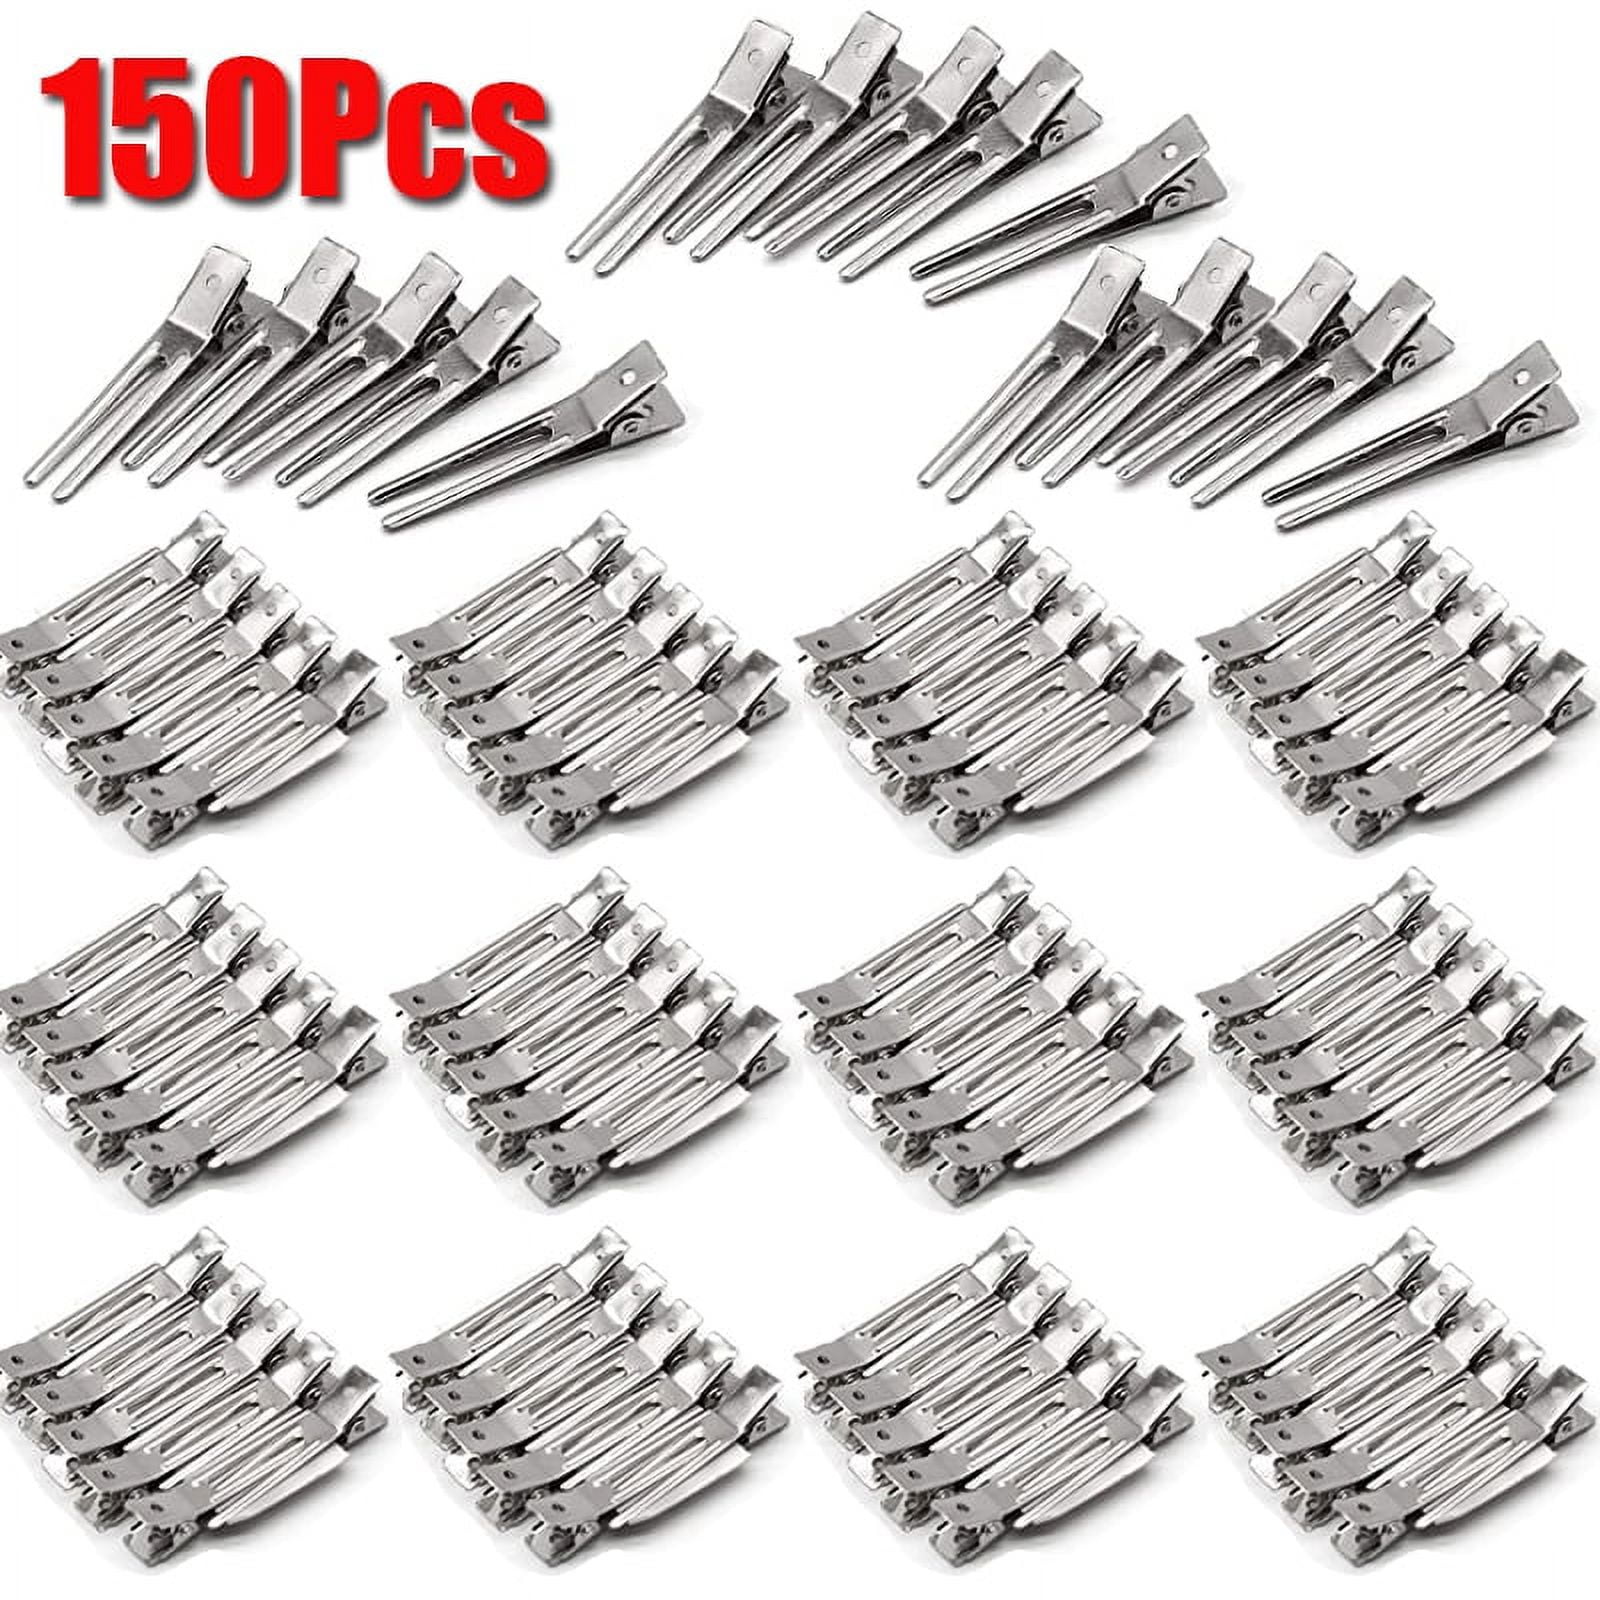 Mandala Crafts 50 Pcs Hairdressing Metal Double Prong Hair Clips for Styling Sectioning Setting